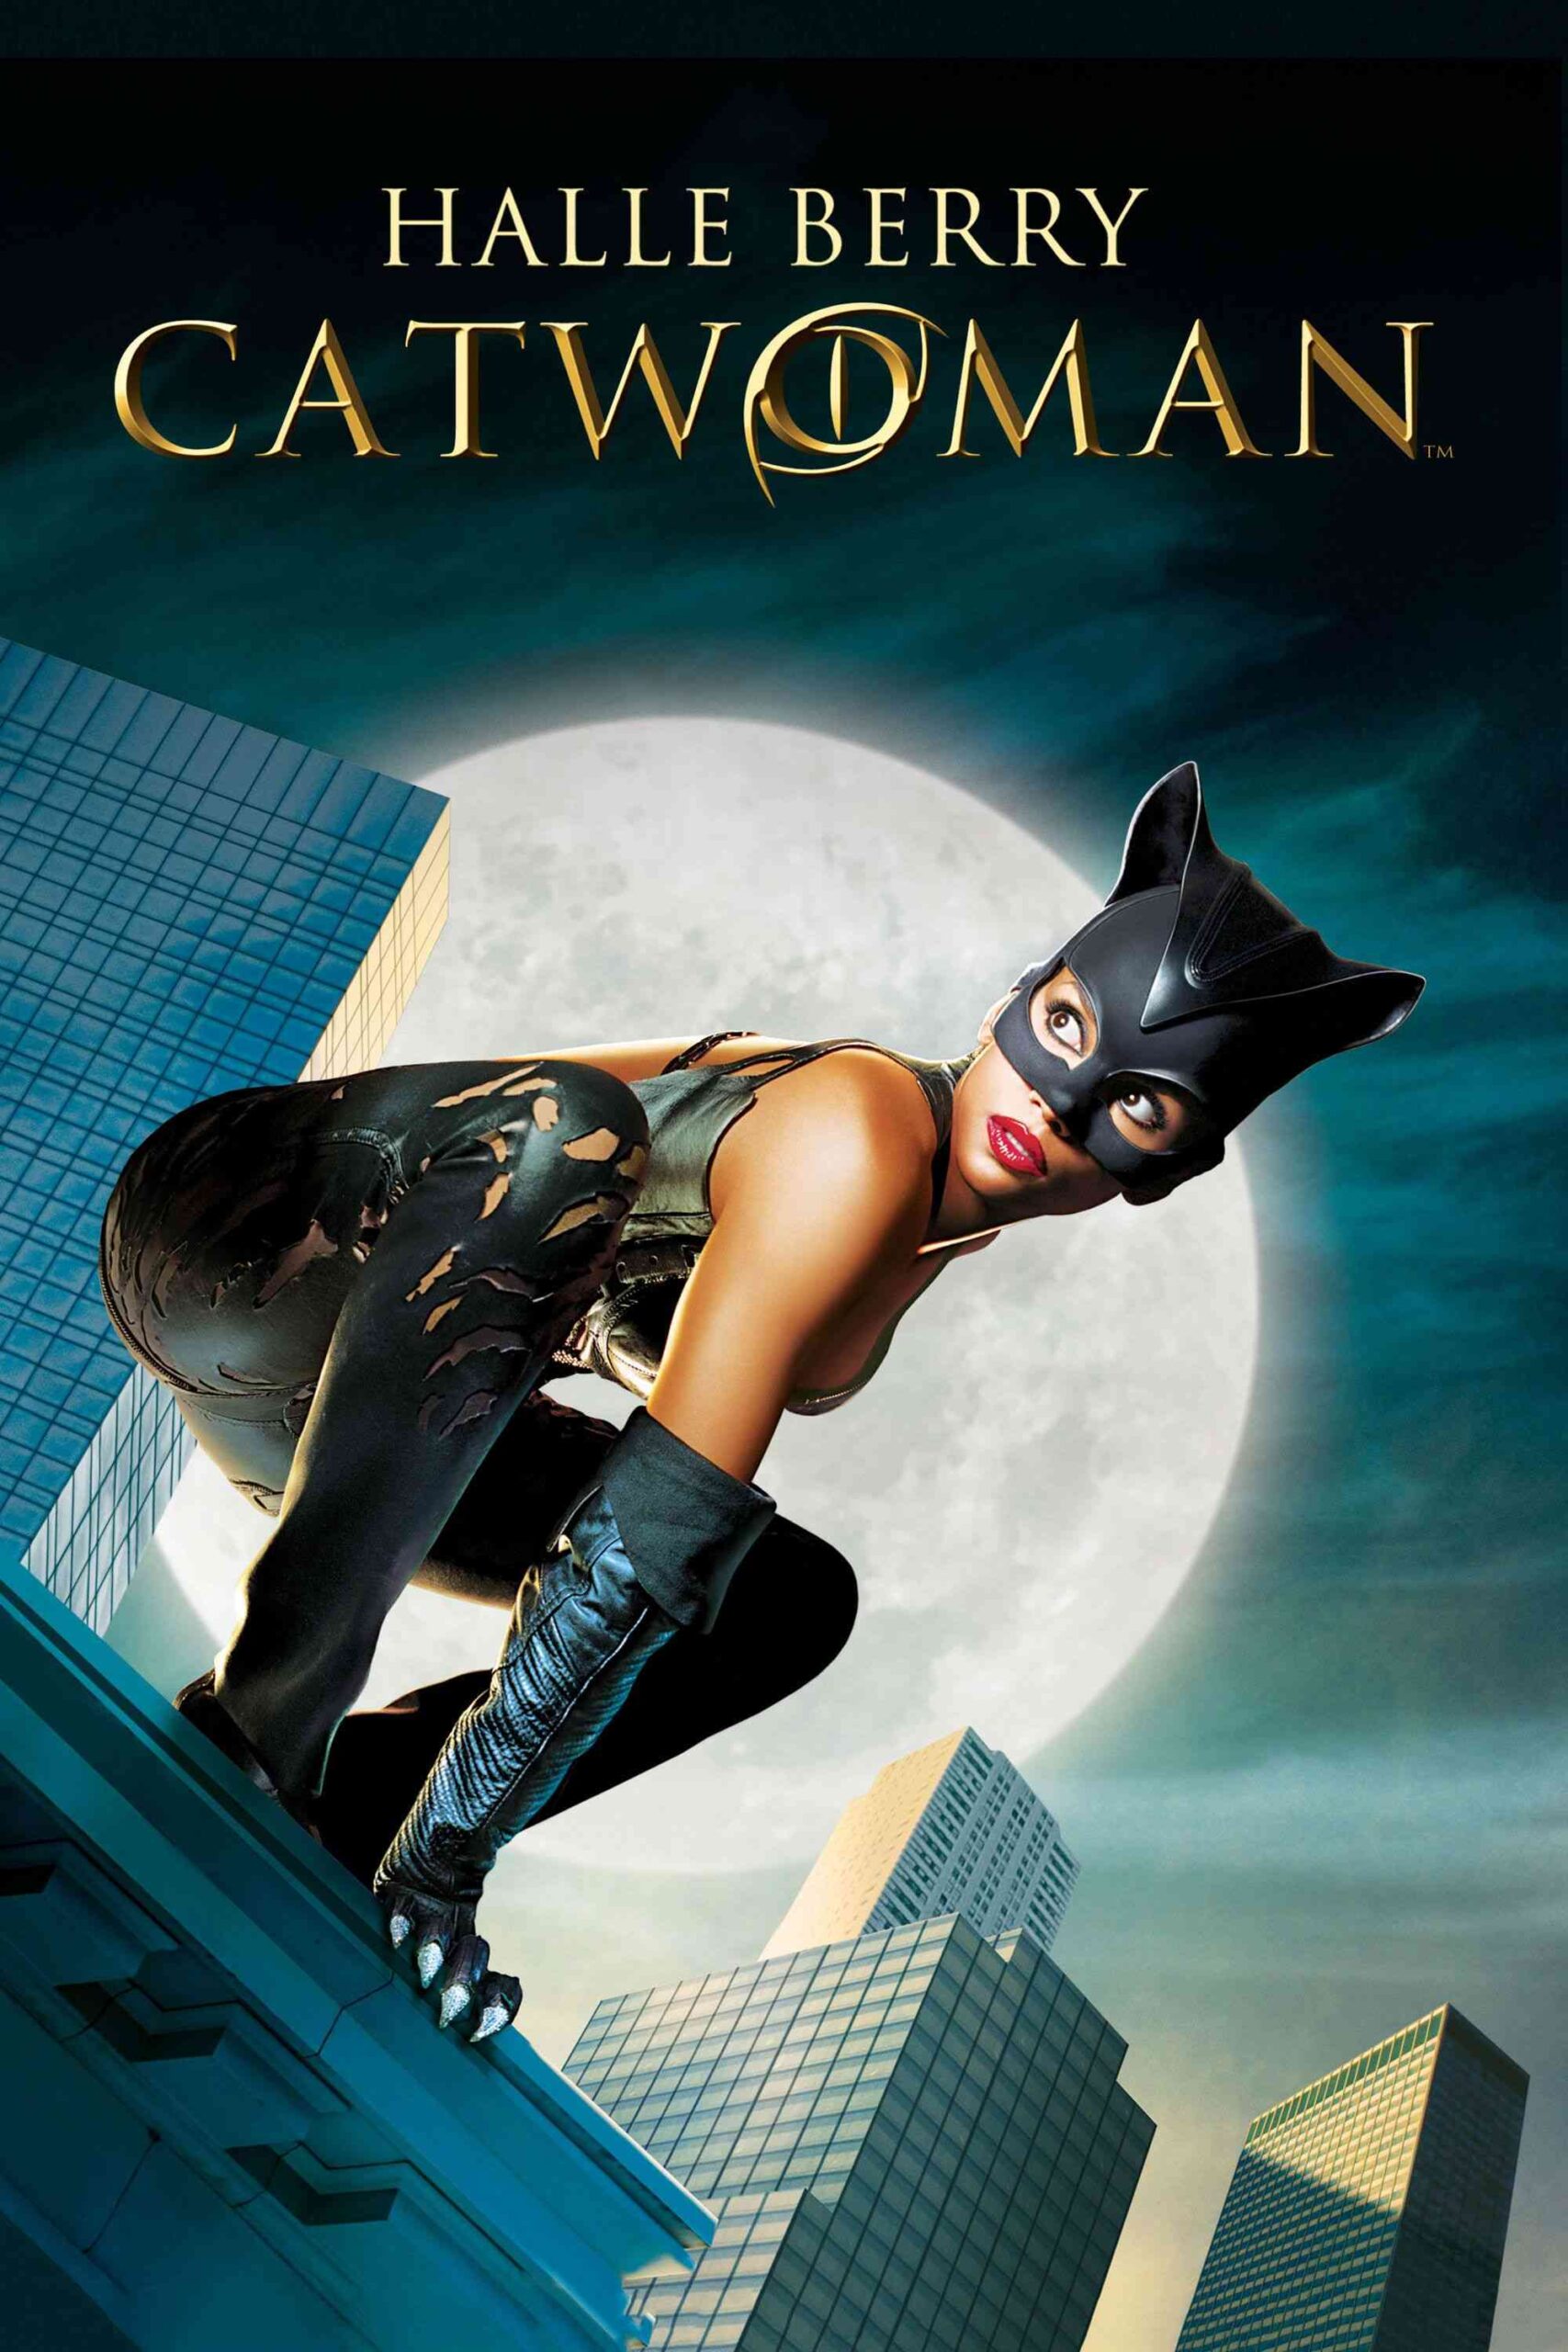 FULL MOVIE: Catwoman (2004) [Action]